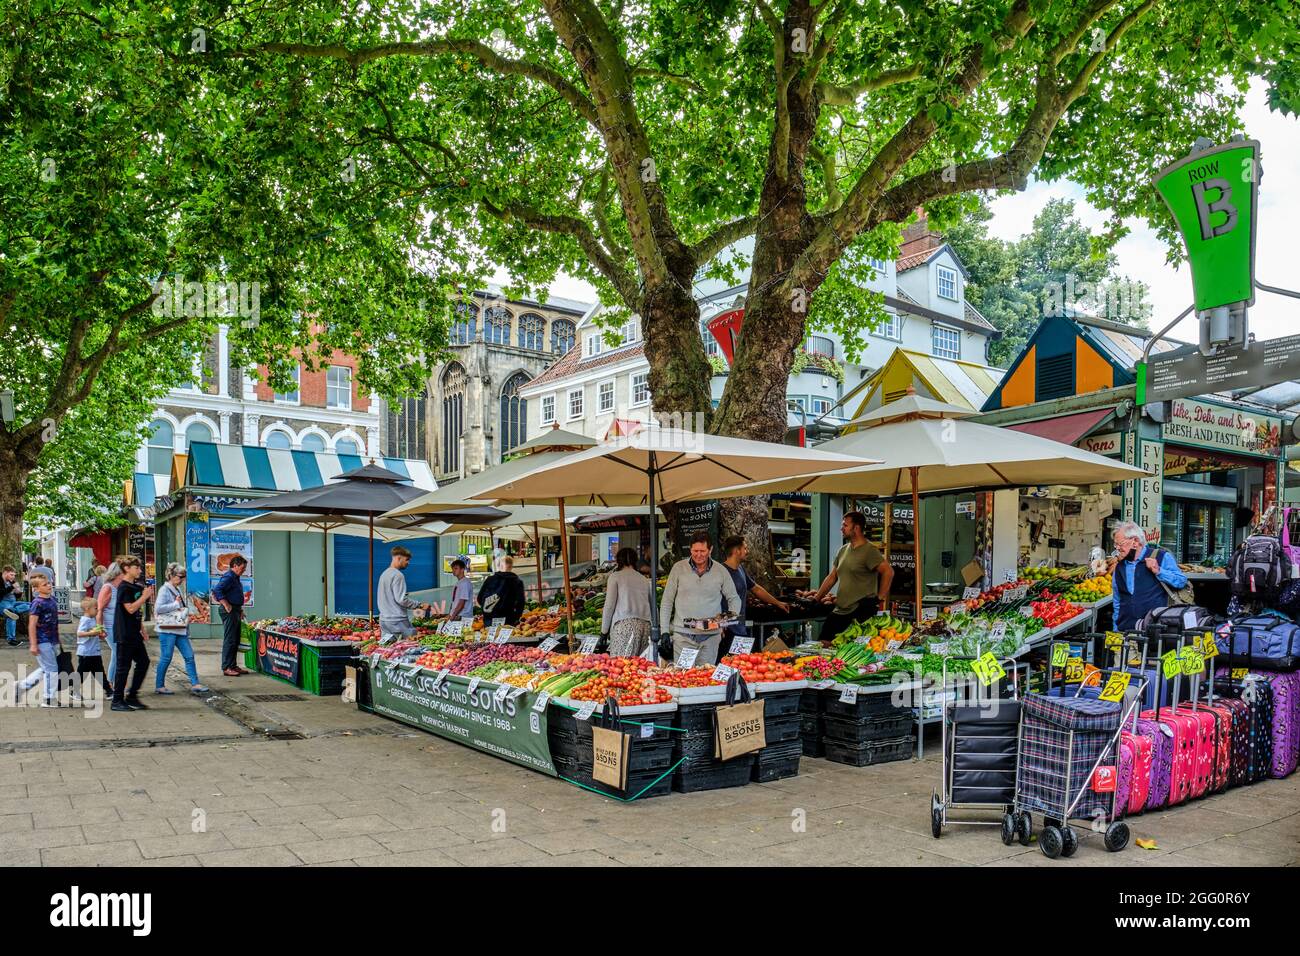 Fruit and vegetable Stall in Norwich Market Stock Photo